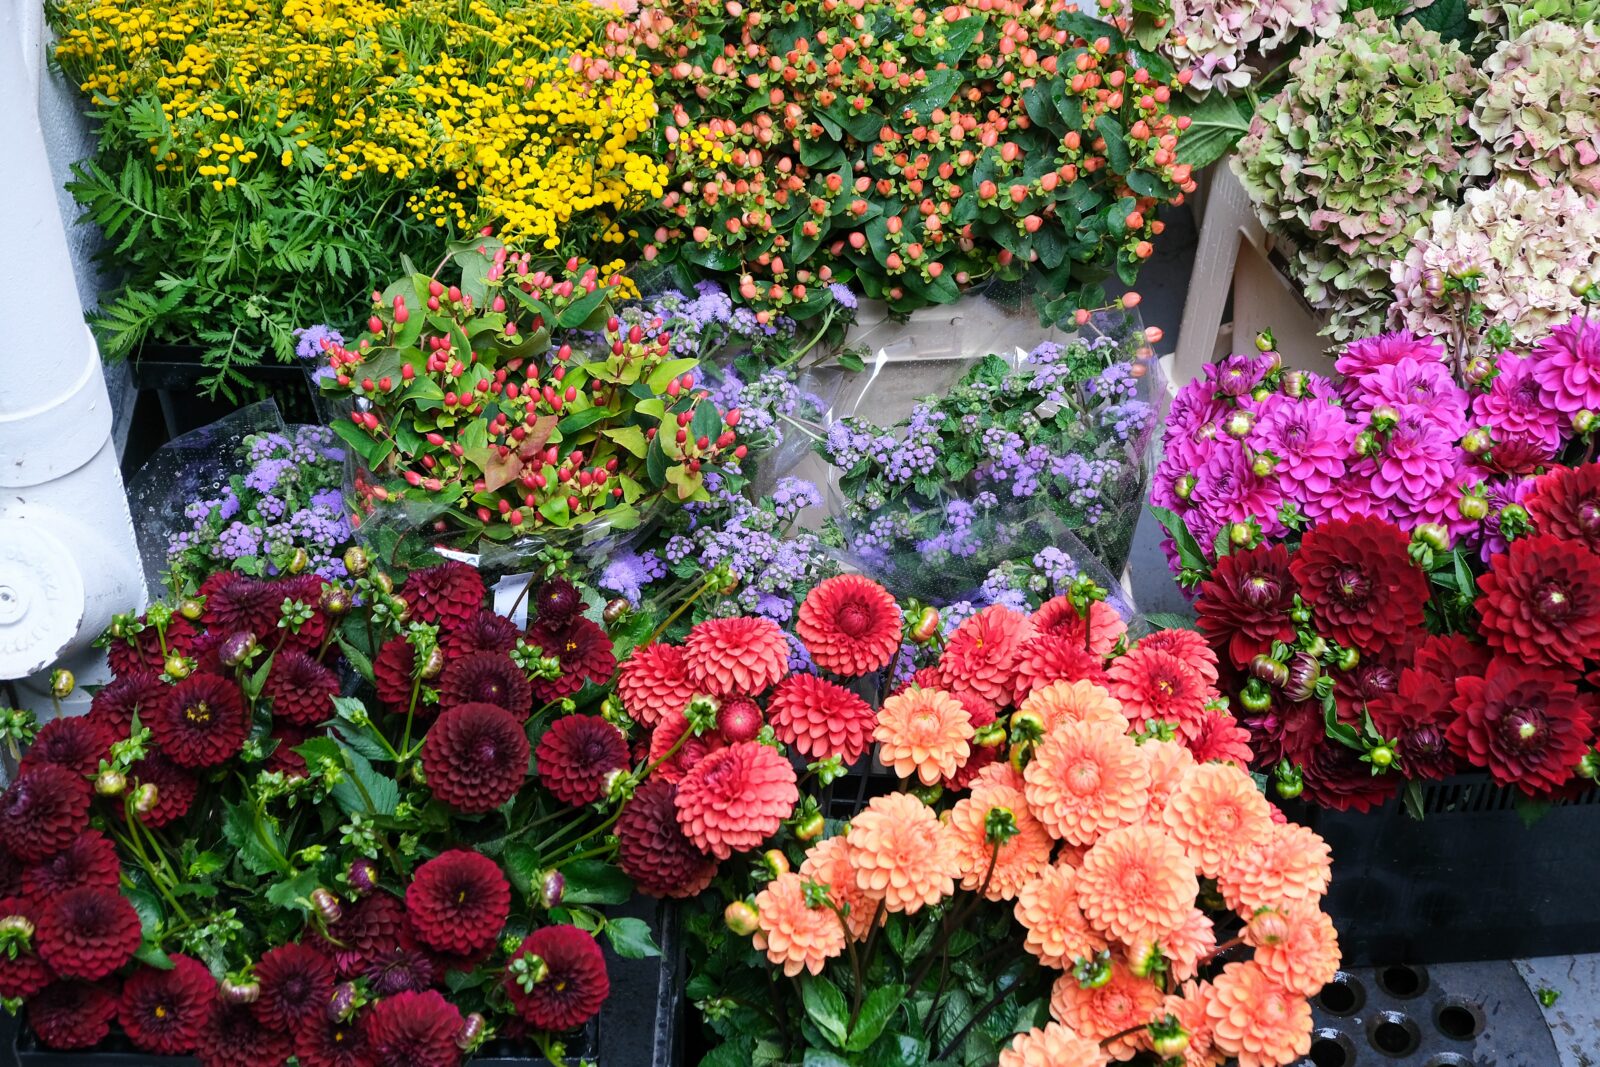 Several colourful flower bouquets standing closely together